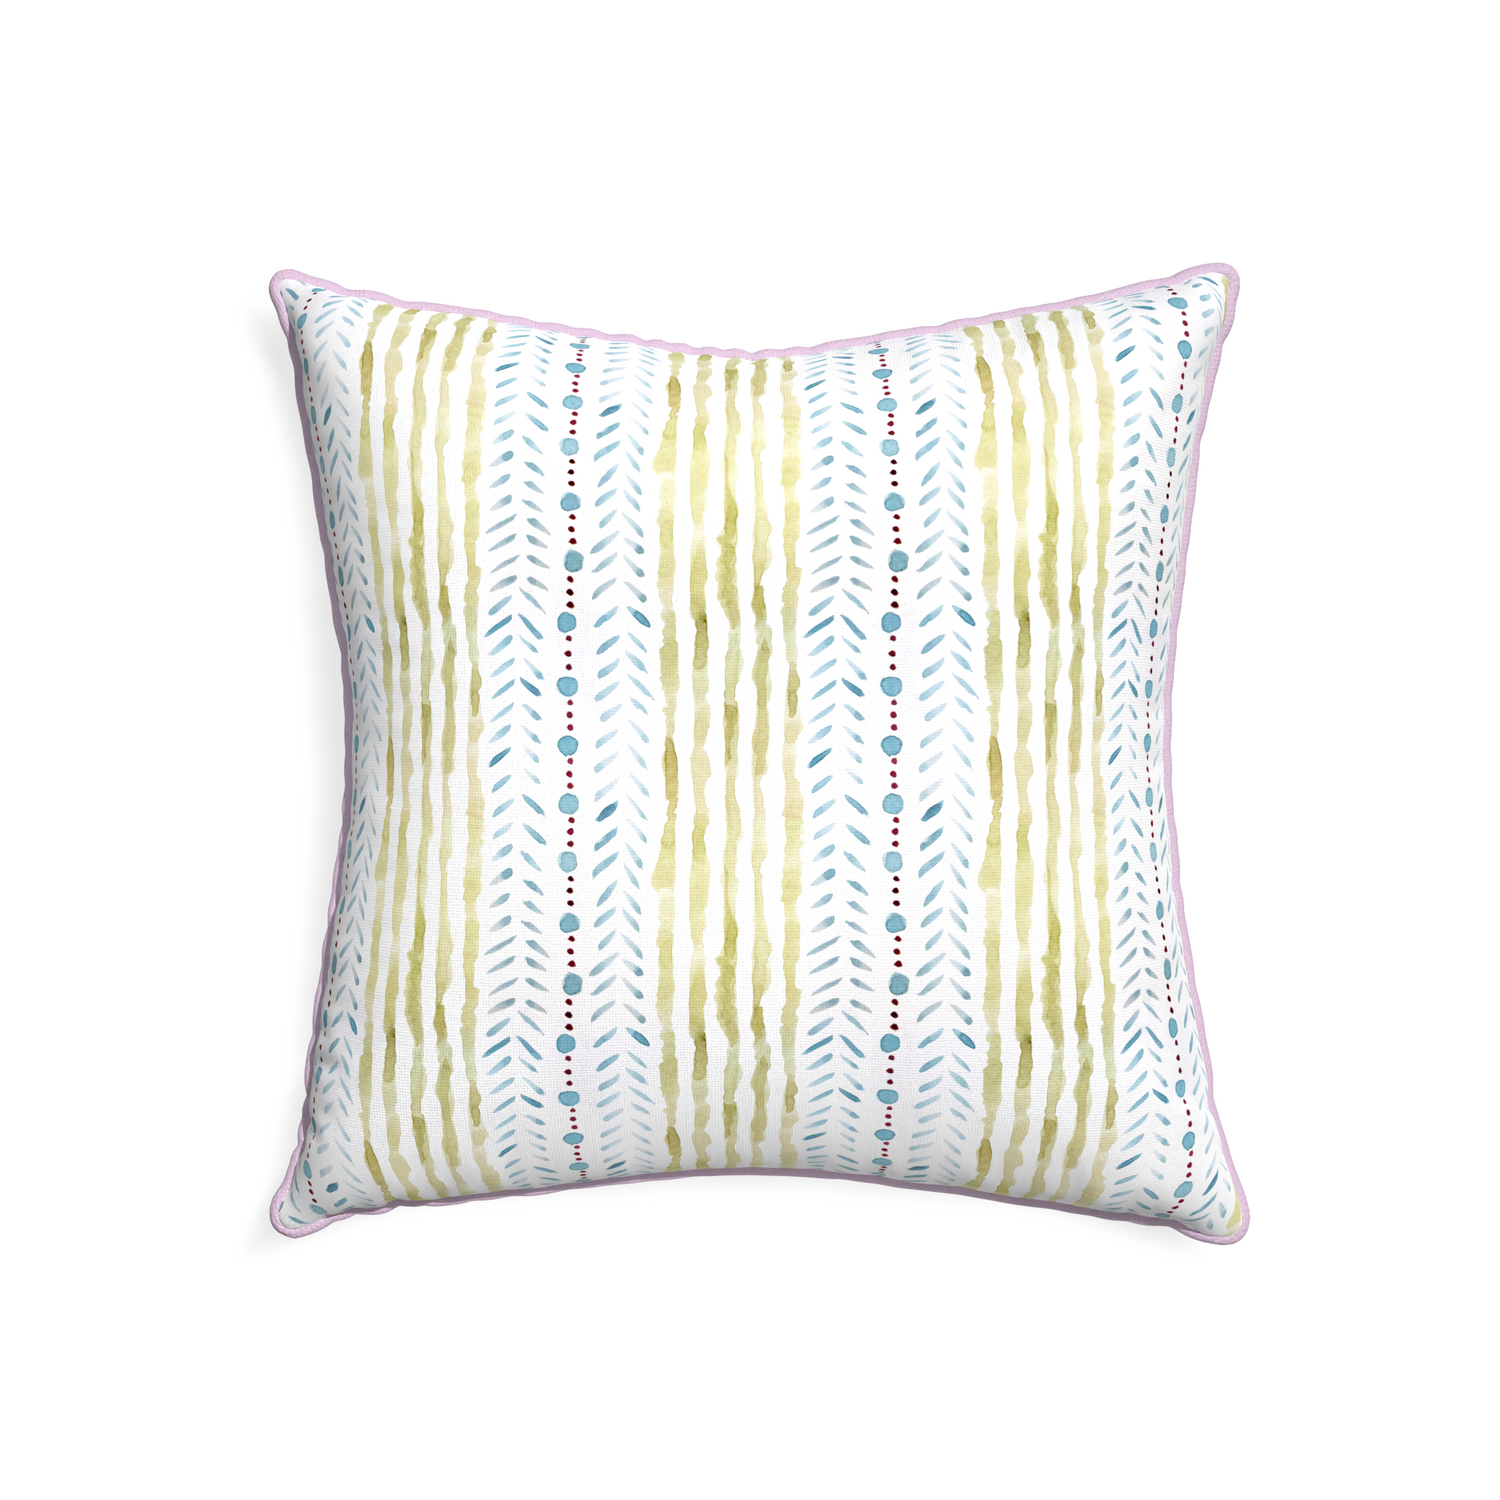 22-square julia custom pillow with l piping on white background